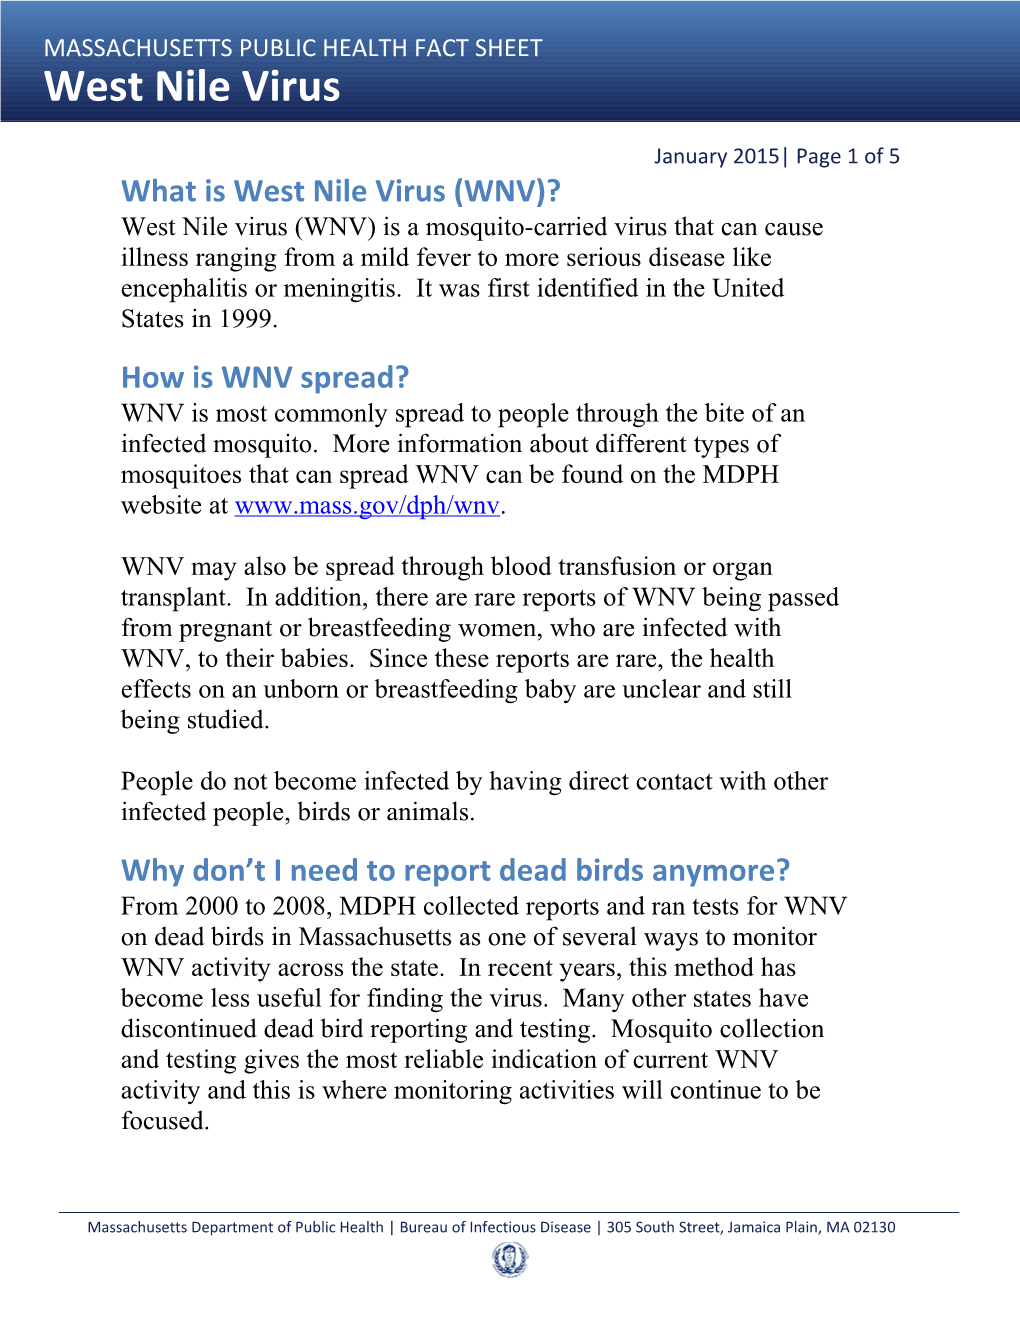 How Is WNV Spread?